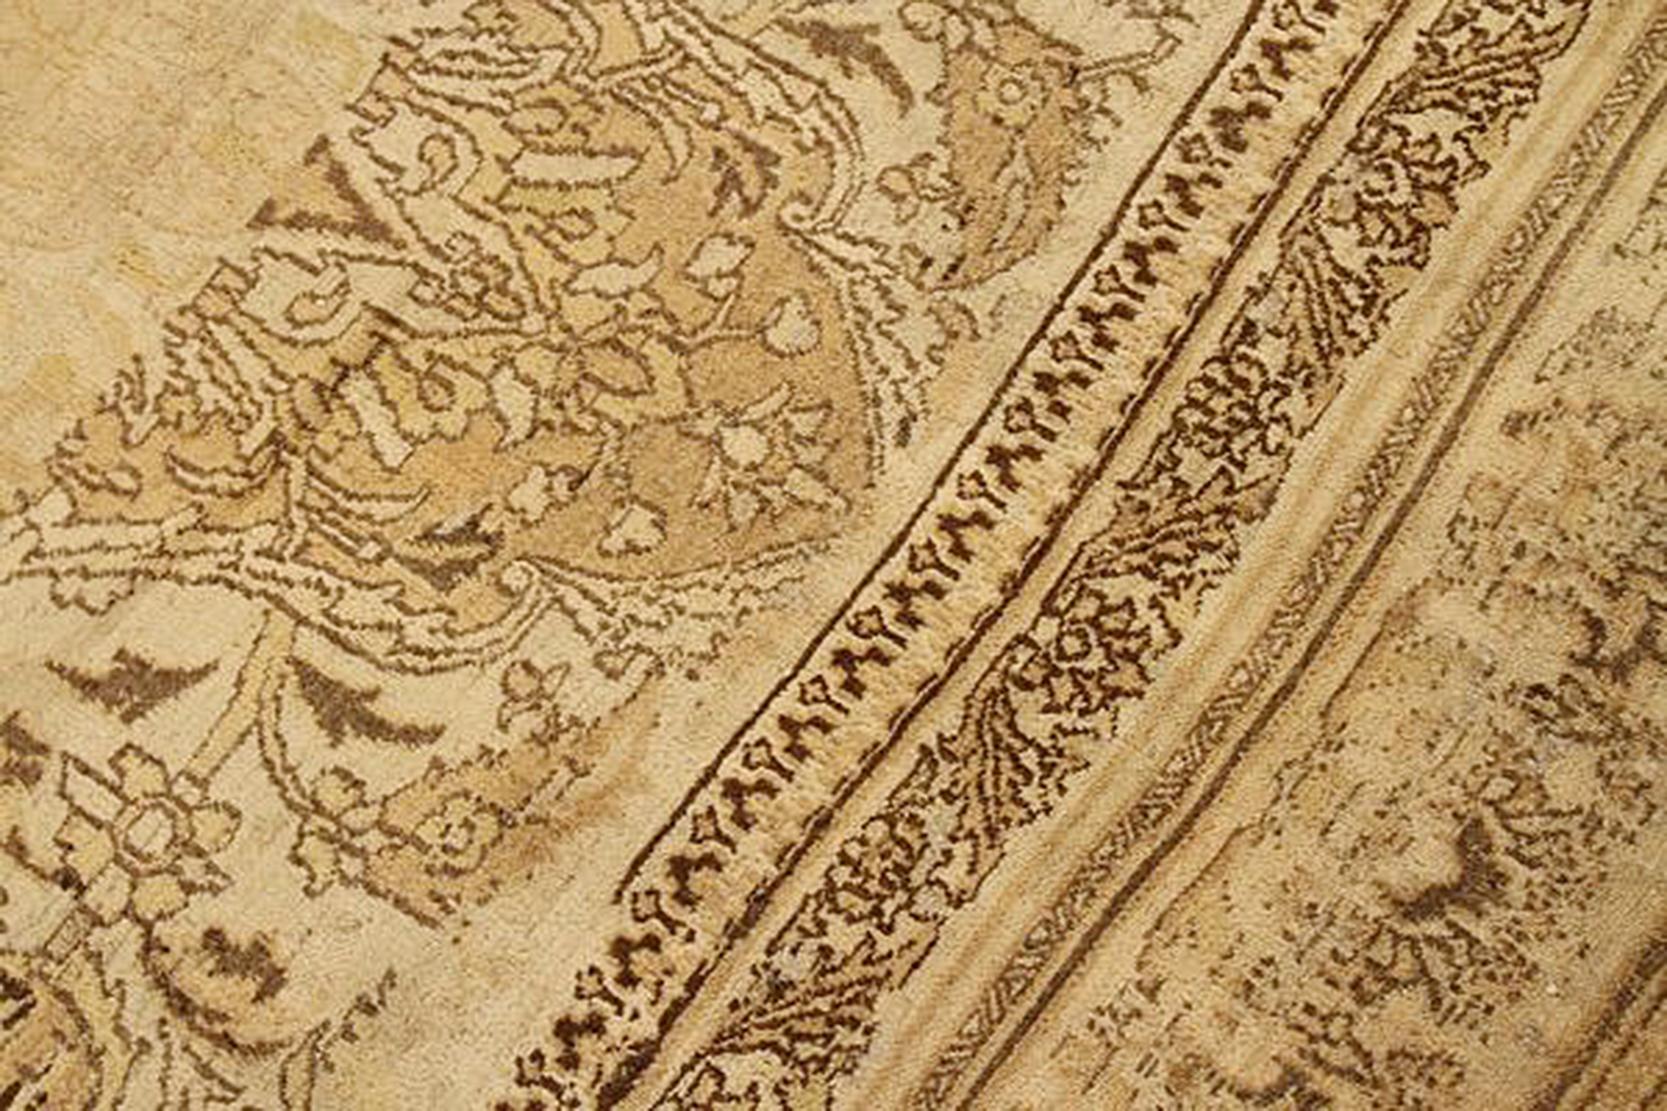 Hand-Woven Antique Persian Doroksh Rug with Brown and Beige Floral Patterns For Sale